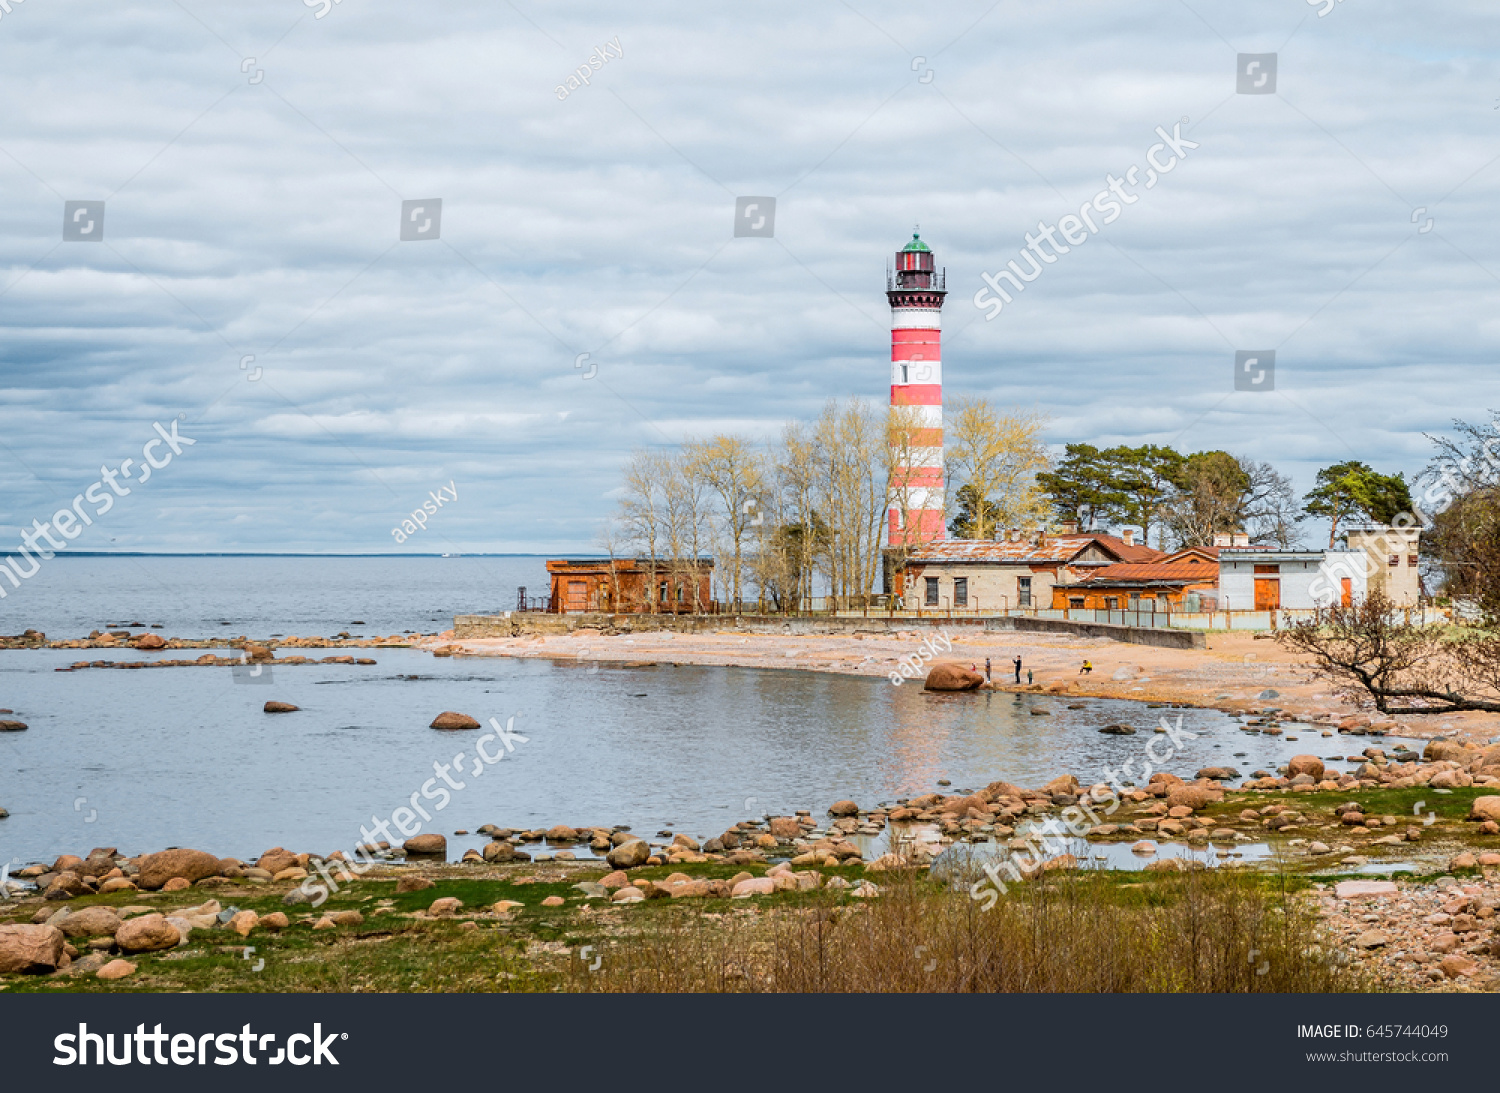 View of the cape on the coast with the old lighthouse in red and white stripes #645744049